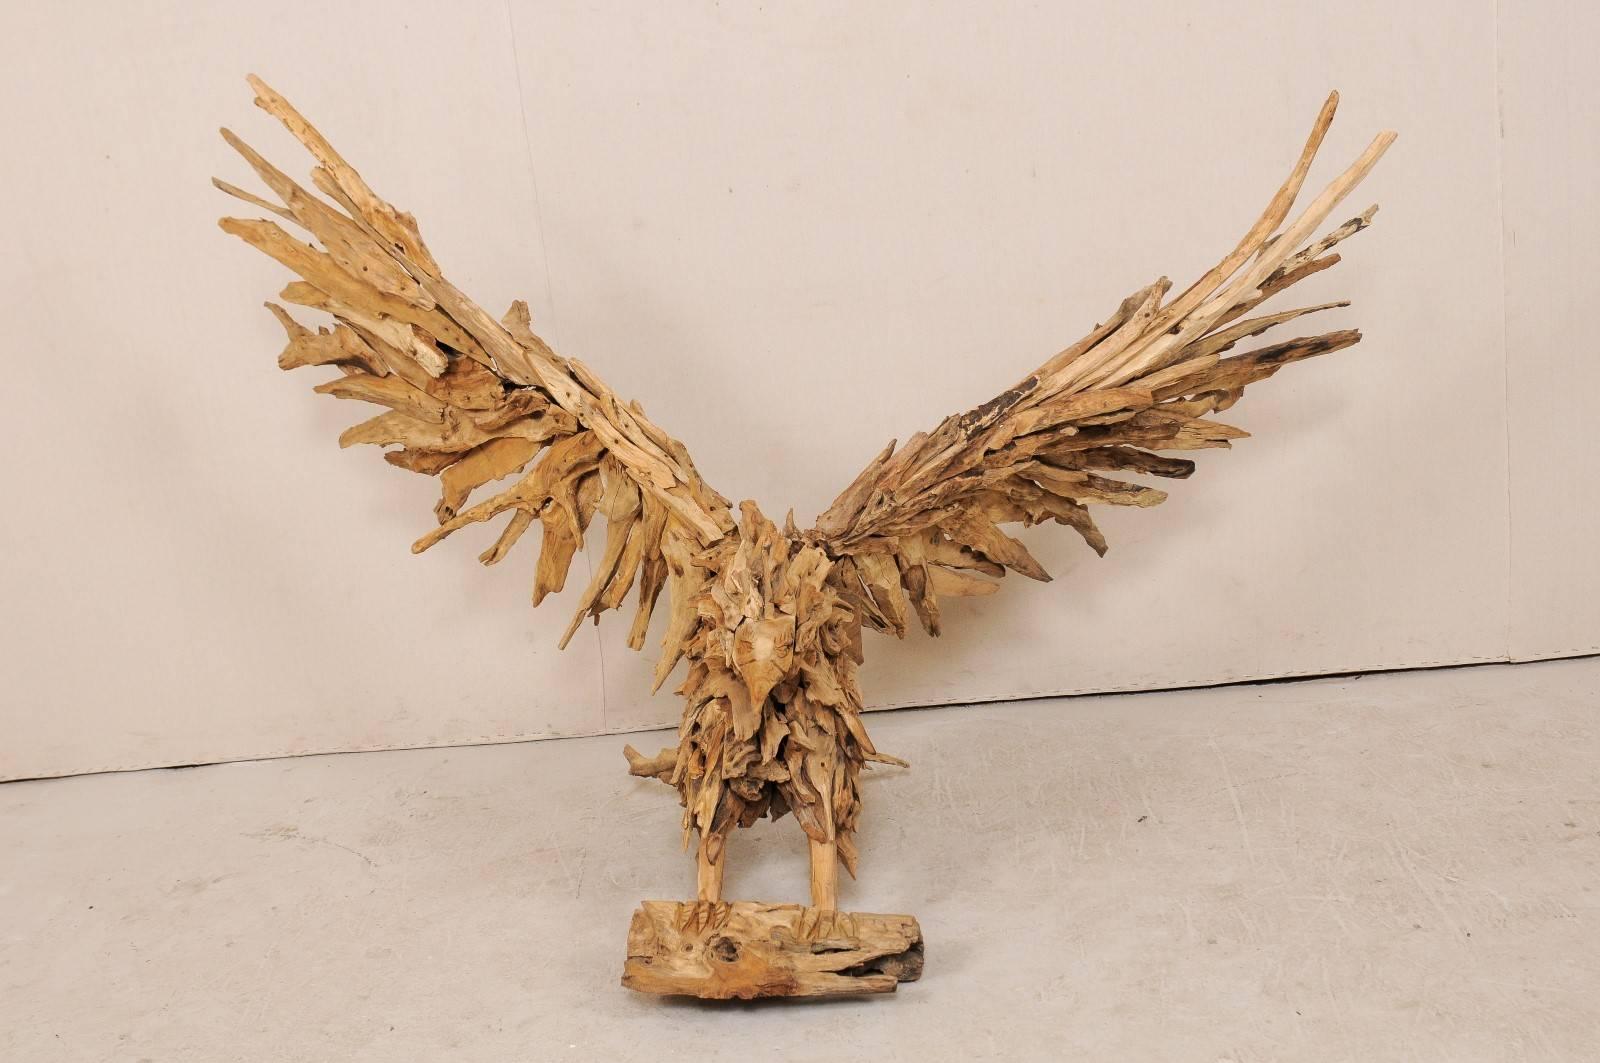 An awe-inspiring large-size eagle sculpture from driftwood. This majestic eagle is depicted with a broad upward wingspan, as if just landing or preparing for flight. The talons are gripped about a larger piece of wood, mouth closed, head straight.